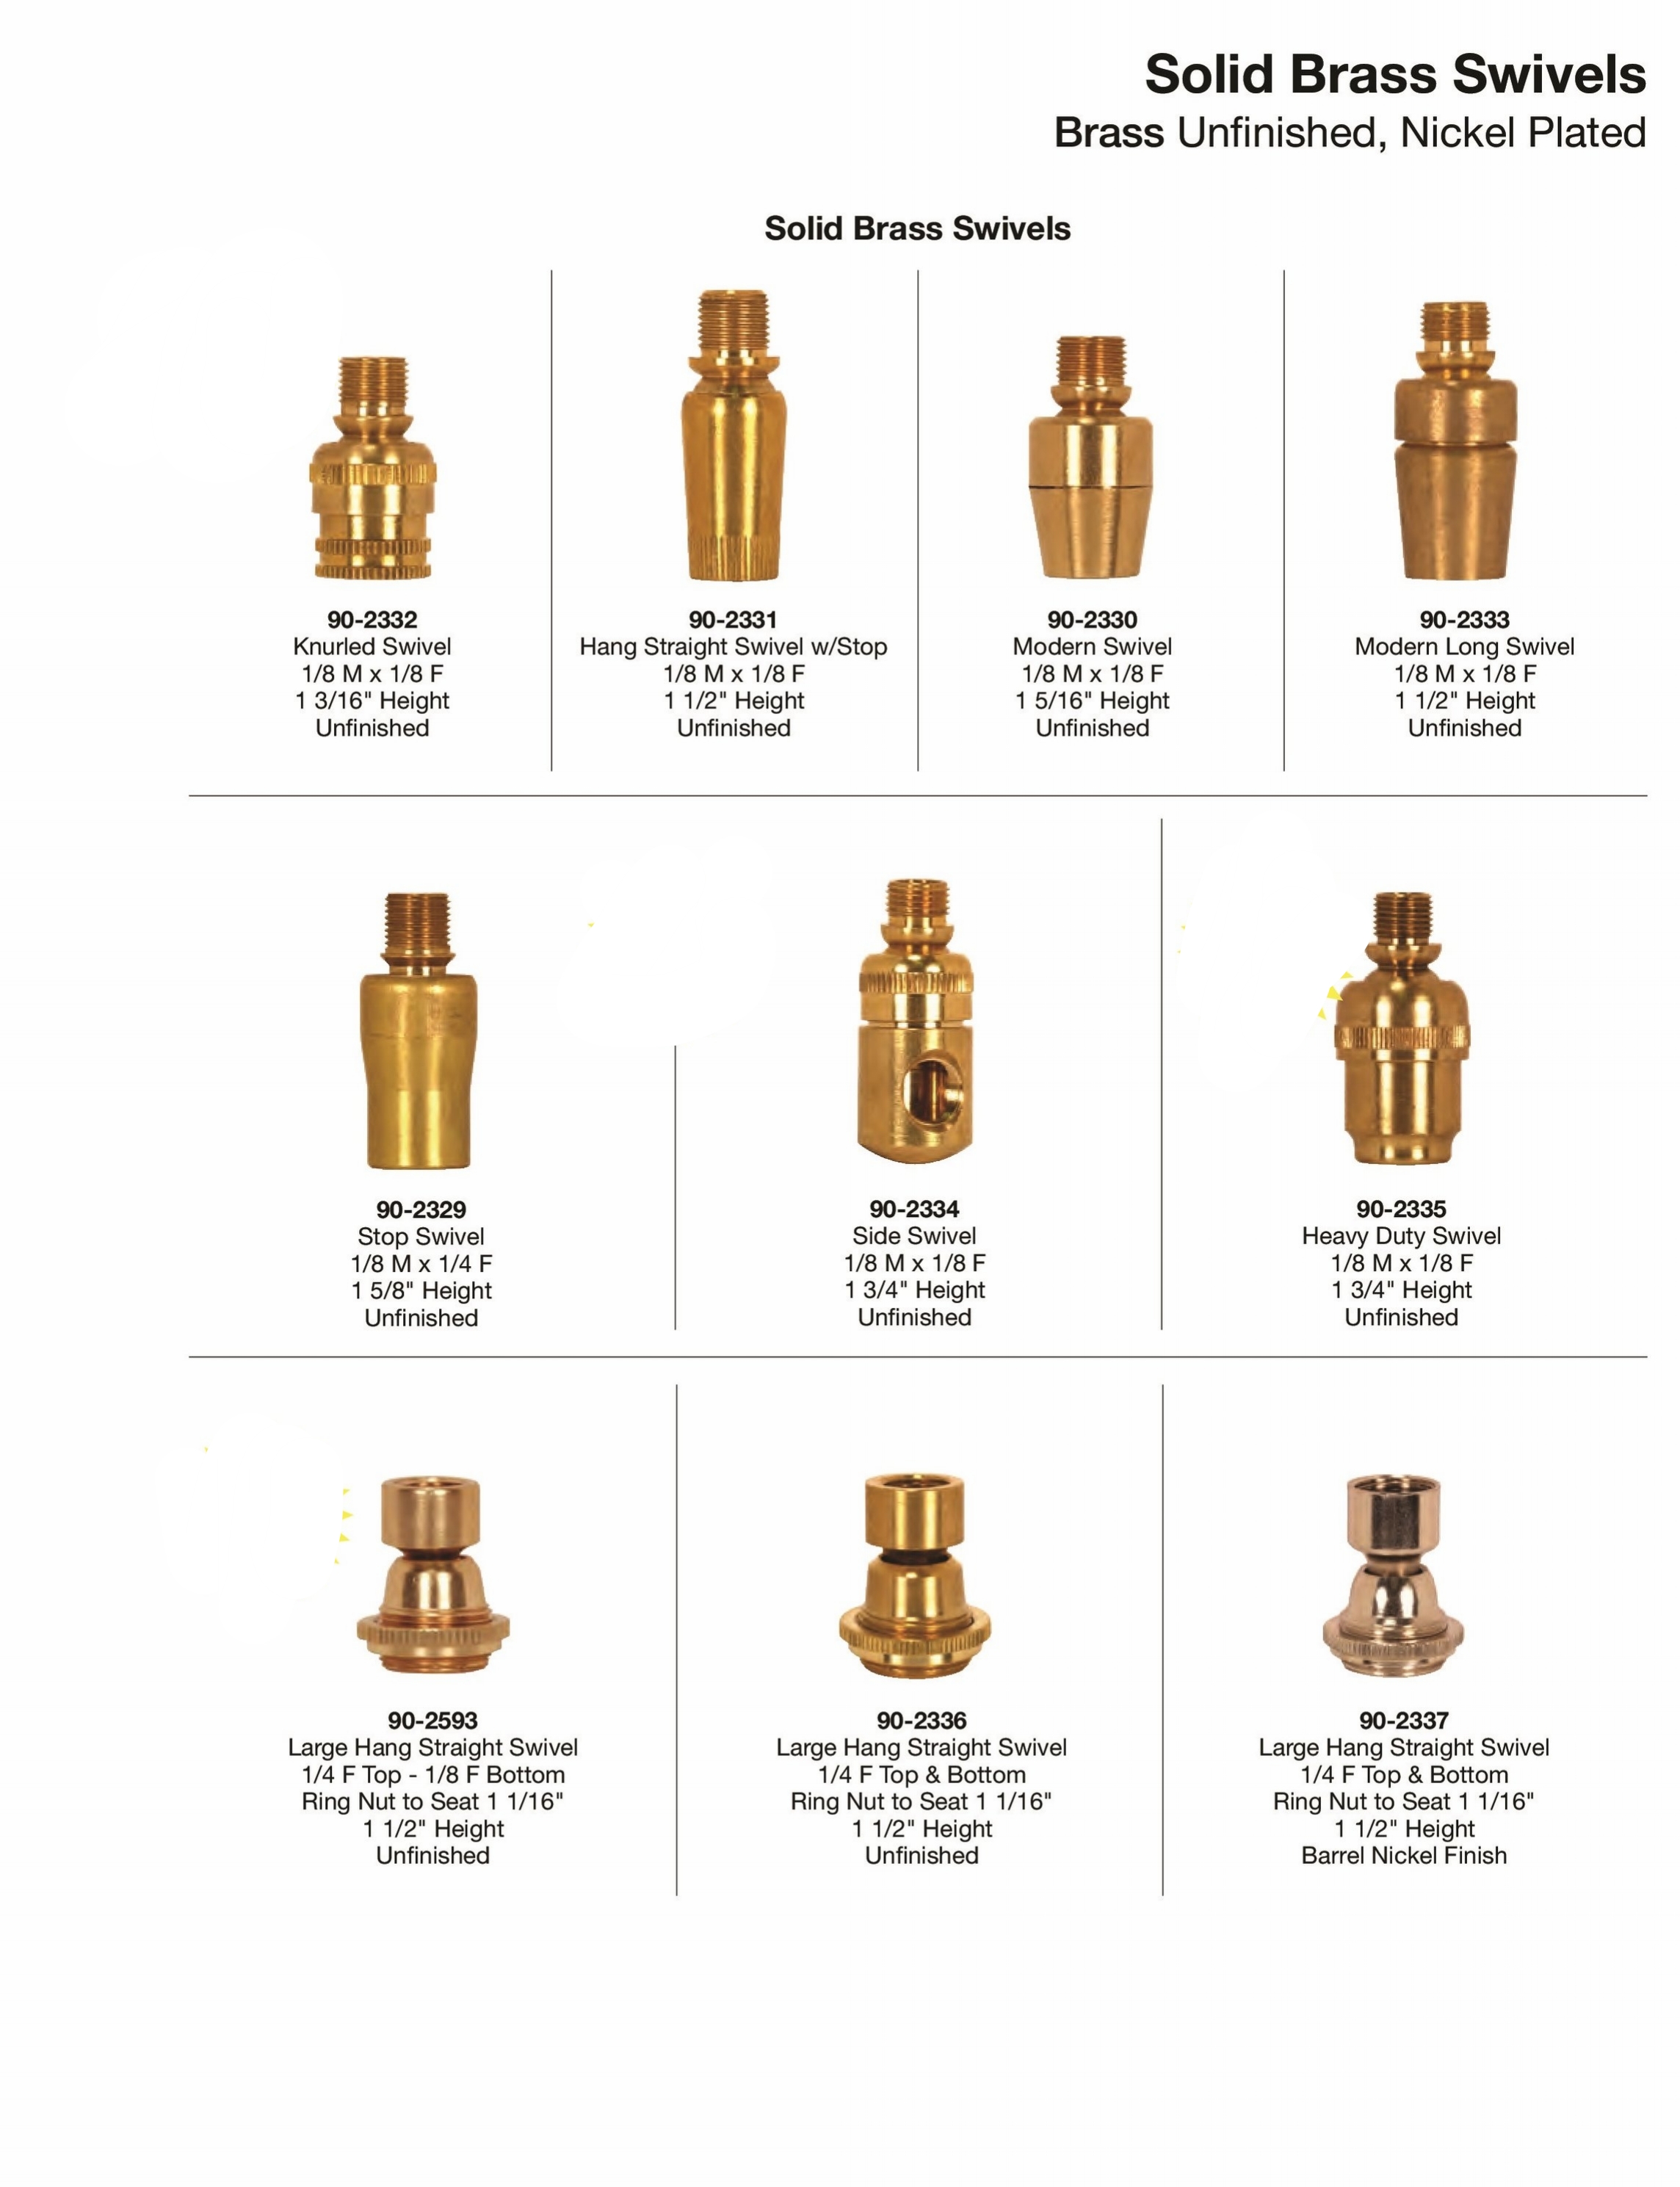 Brass Knurled Electric Socket Swivel for Electric Lamp Fixture or Floor Lamp 